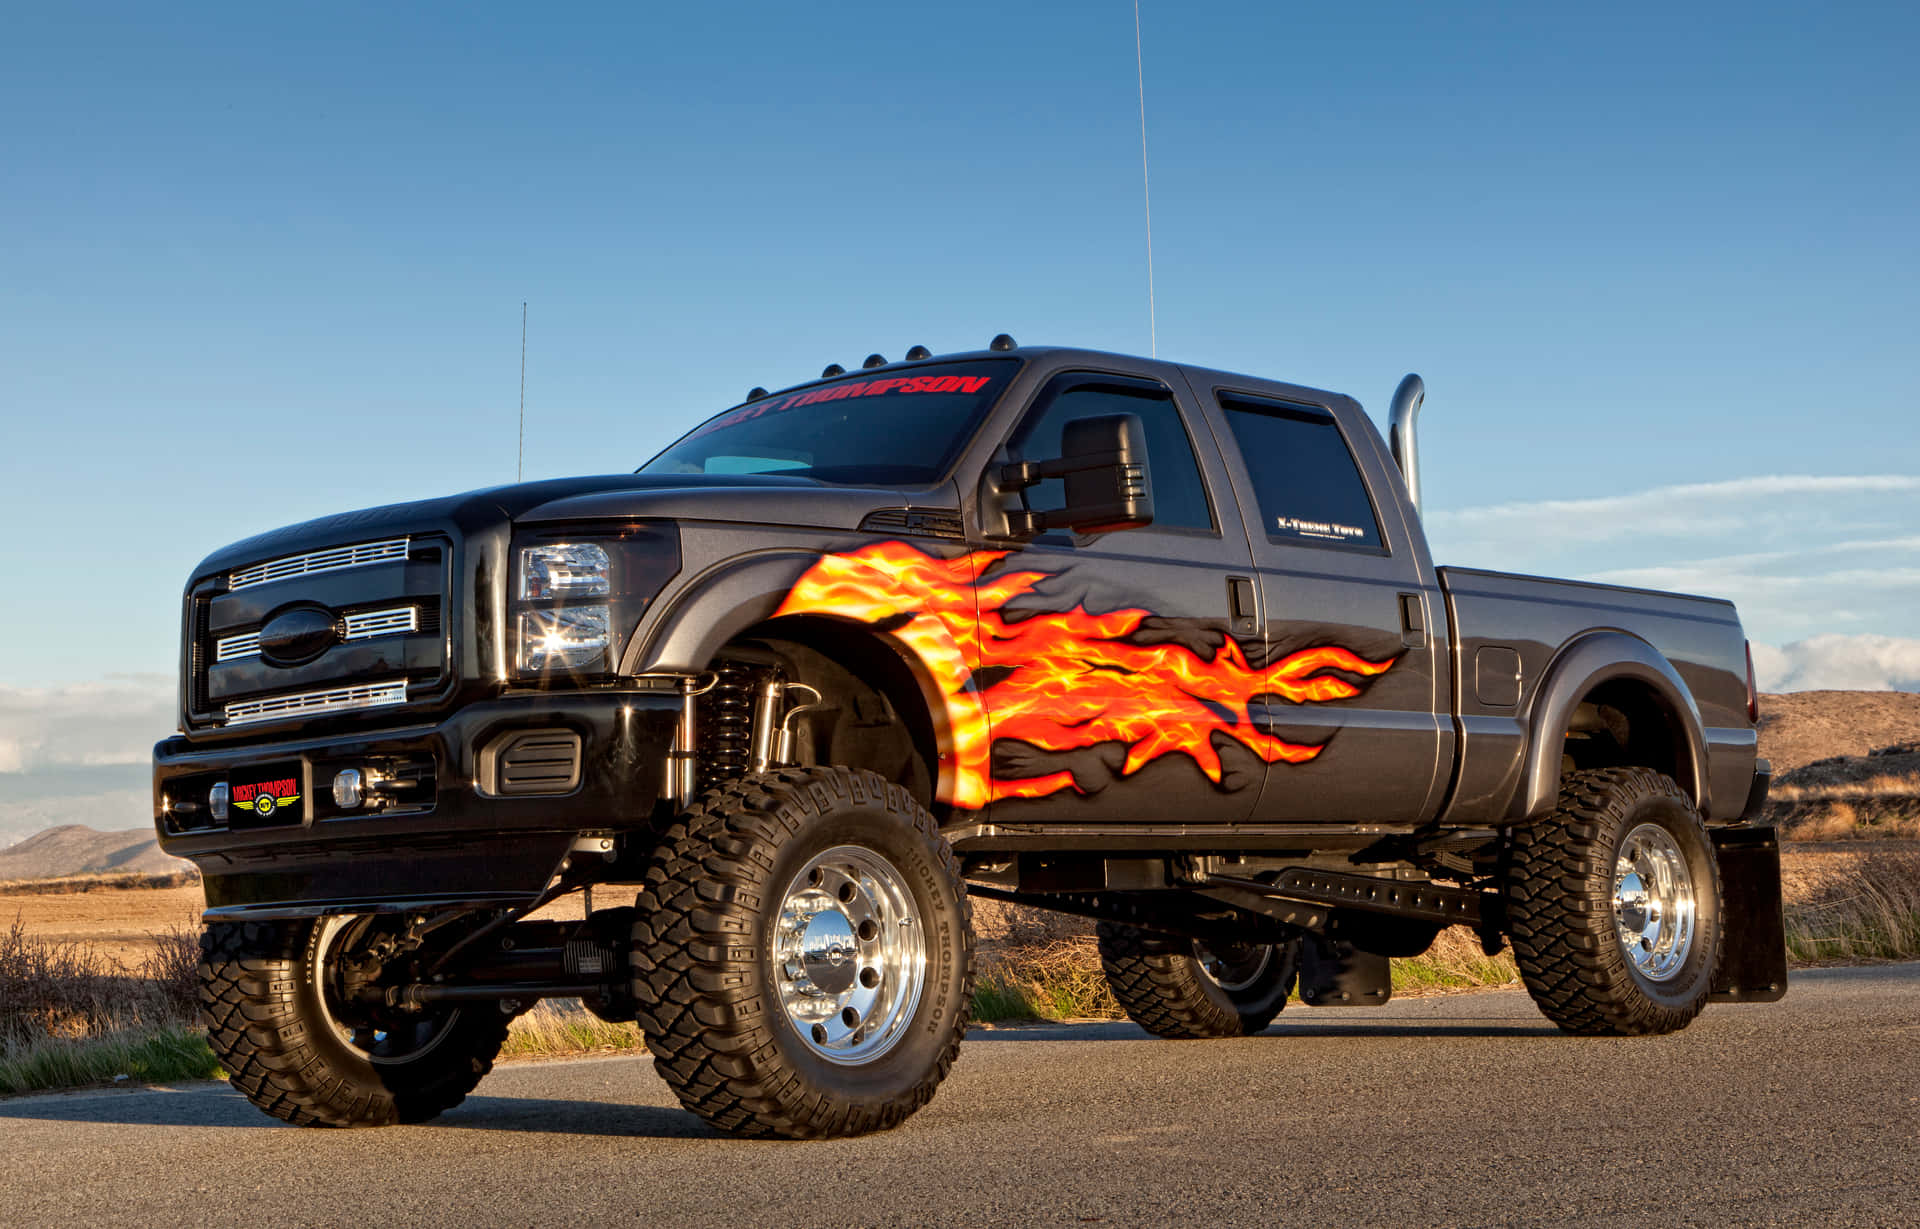 A Black Truck With Flames On It